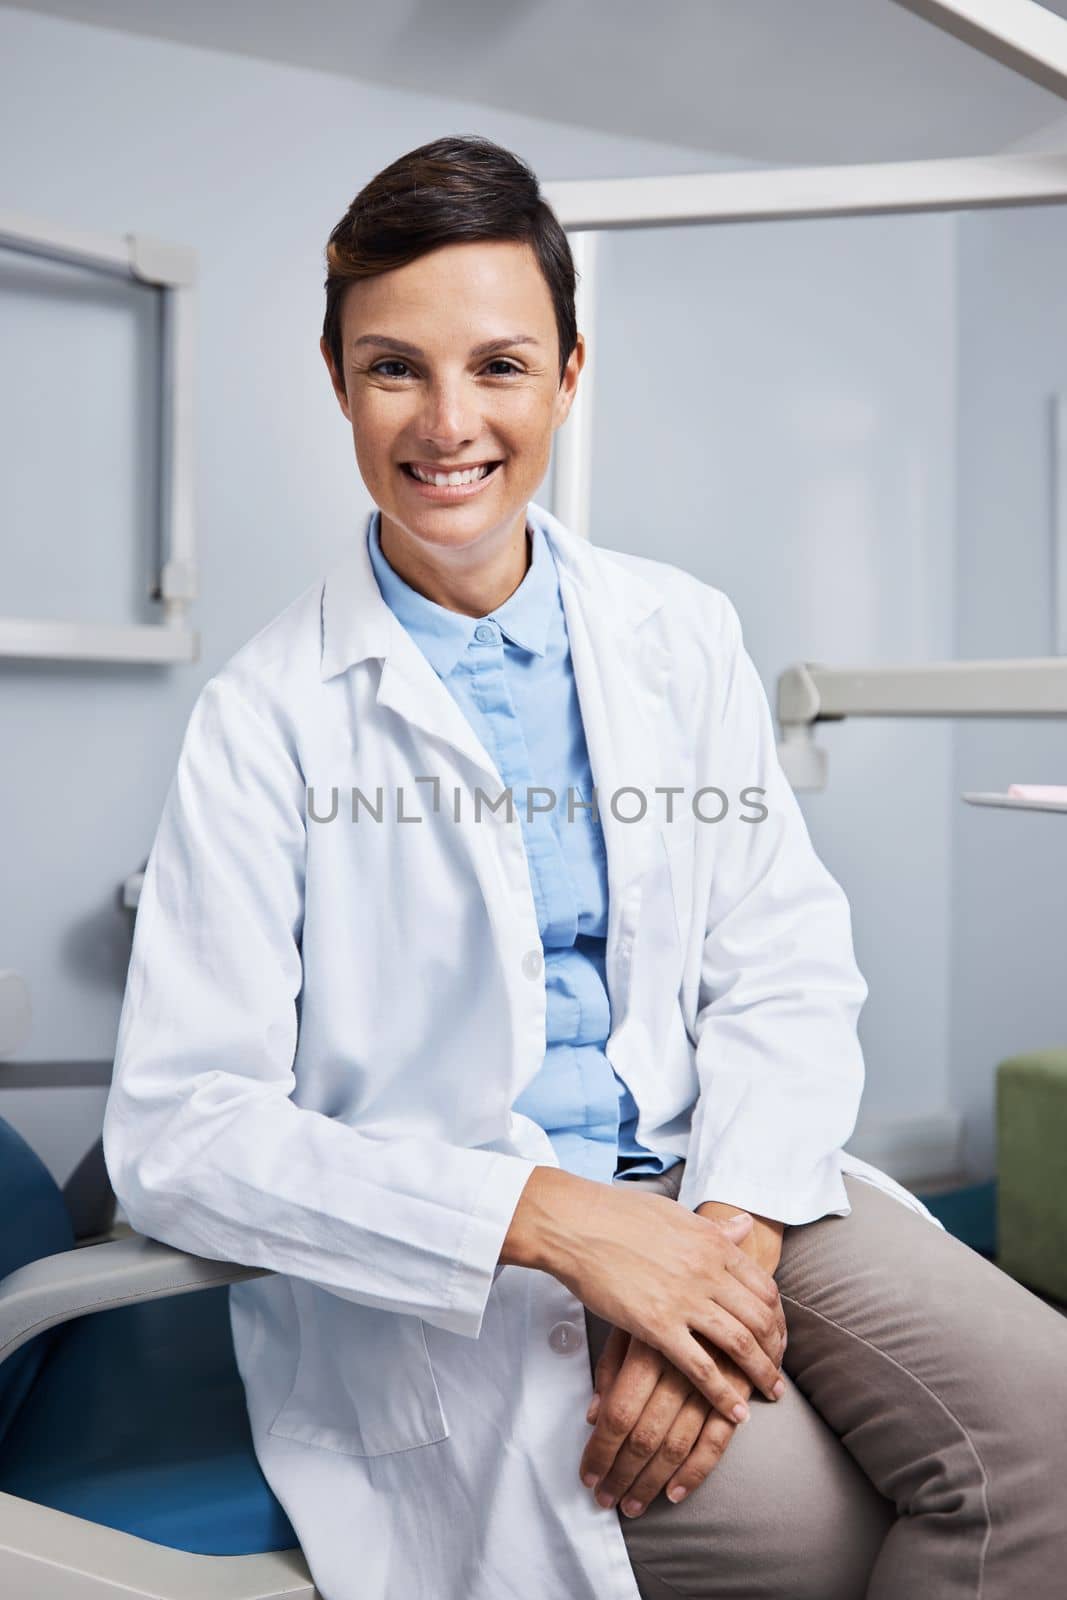 We brighten smiles beyond our patients expectations. Portrait of a confident young woman working in a dentists office